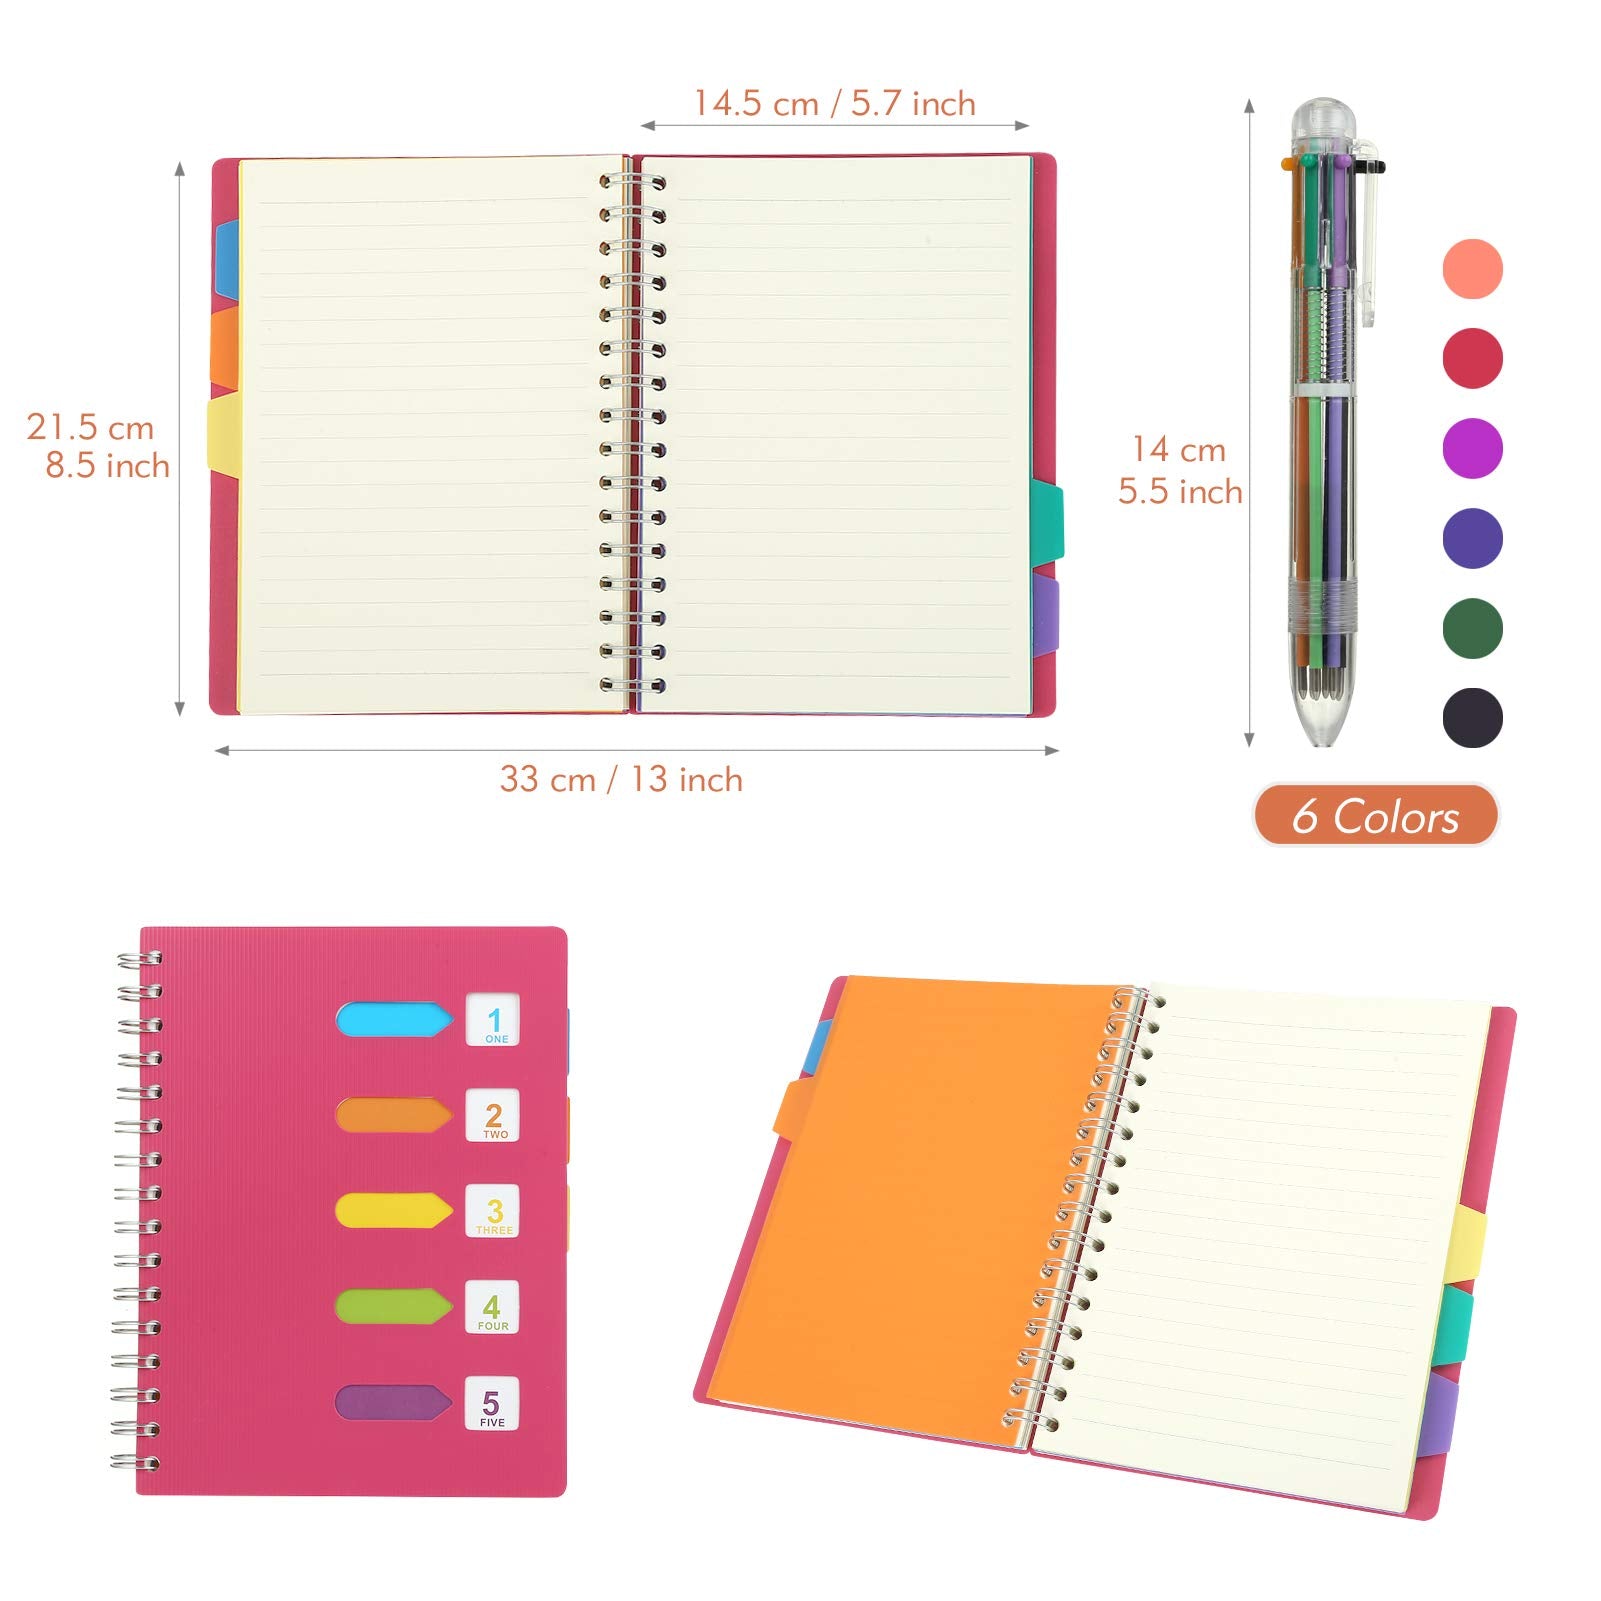 Kesote Lined Notebook with Multicolor Pen, Subject Notebook 120 Pages A5 Journal with 5 Colored Tab& 6-in-1 Retractable Ballpoint Color Pen - Rose Pink